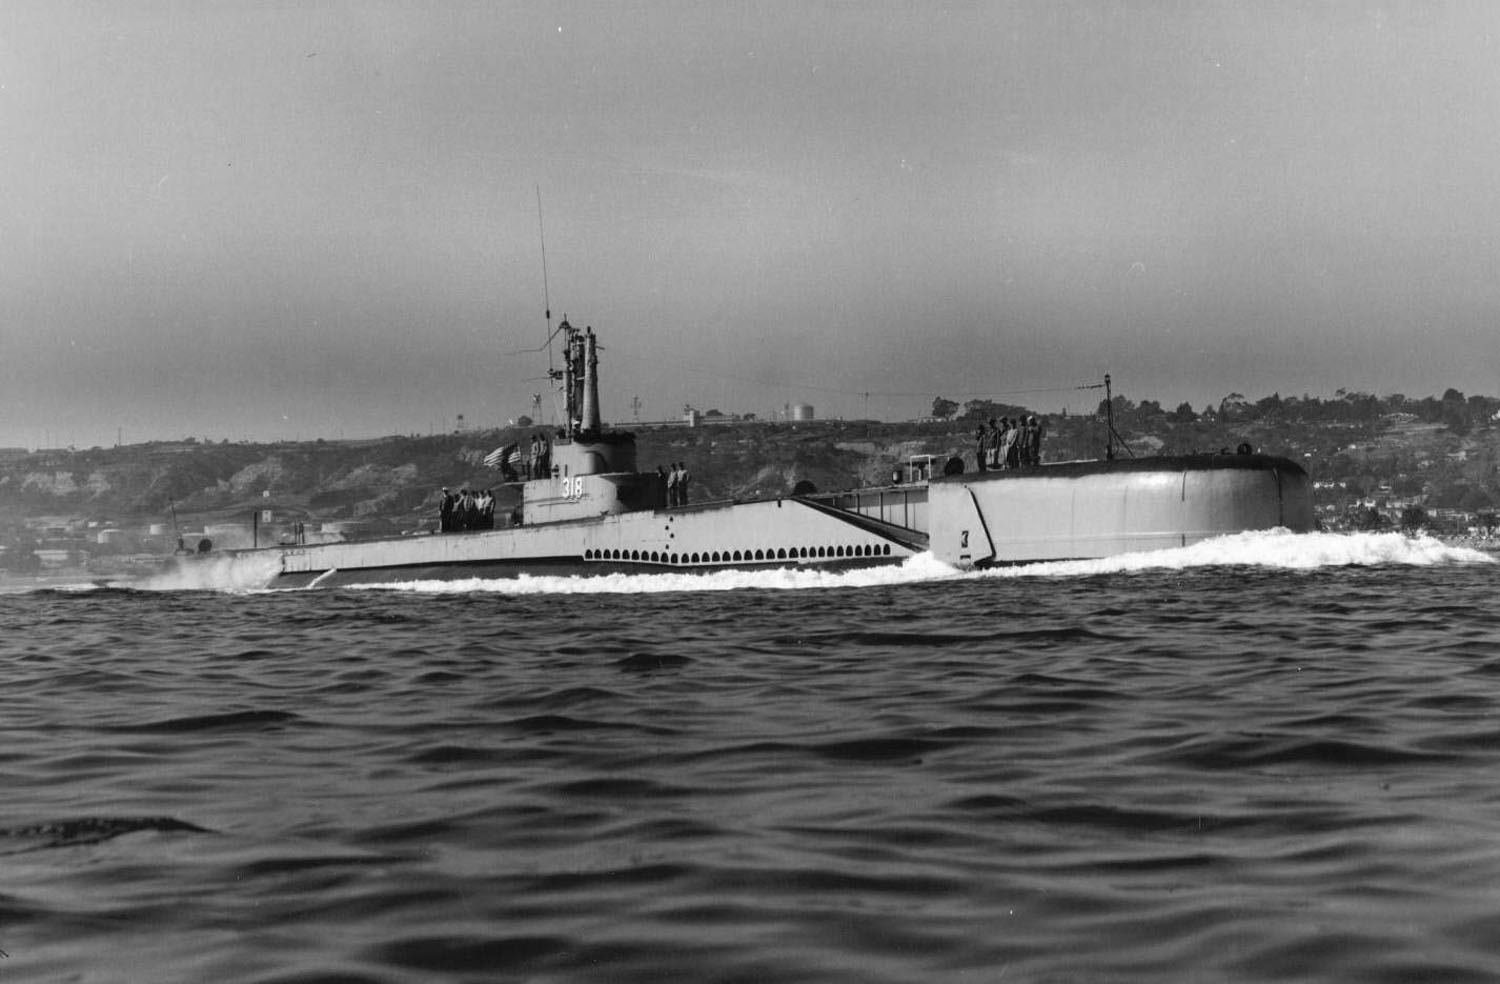 Royce Pettit's fifth and last boat from 1963 to 1965, the USS Baya (AGSS‑318). Royce was the Commanding Officer.